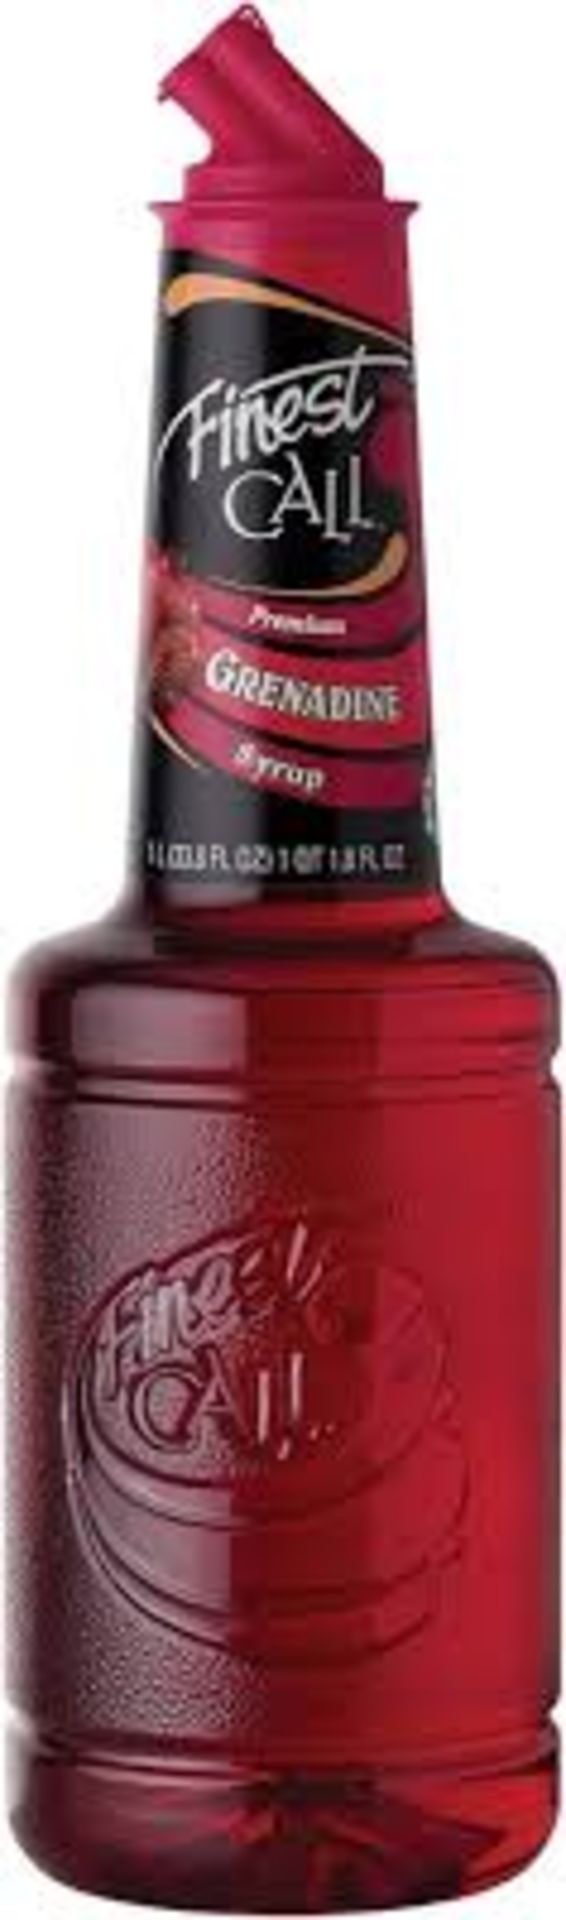 RRP £300 X30 (1L) Finest Call Grenadine Syrup Bbe-8.26